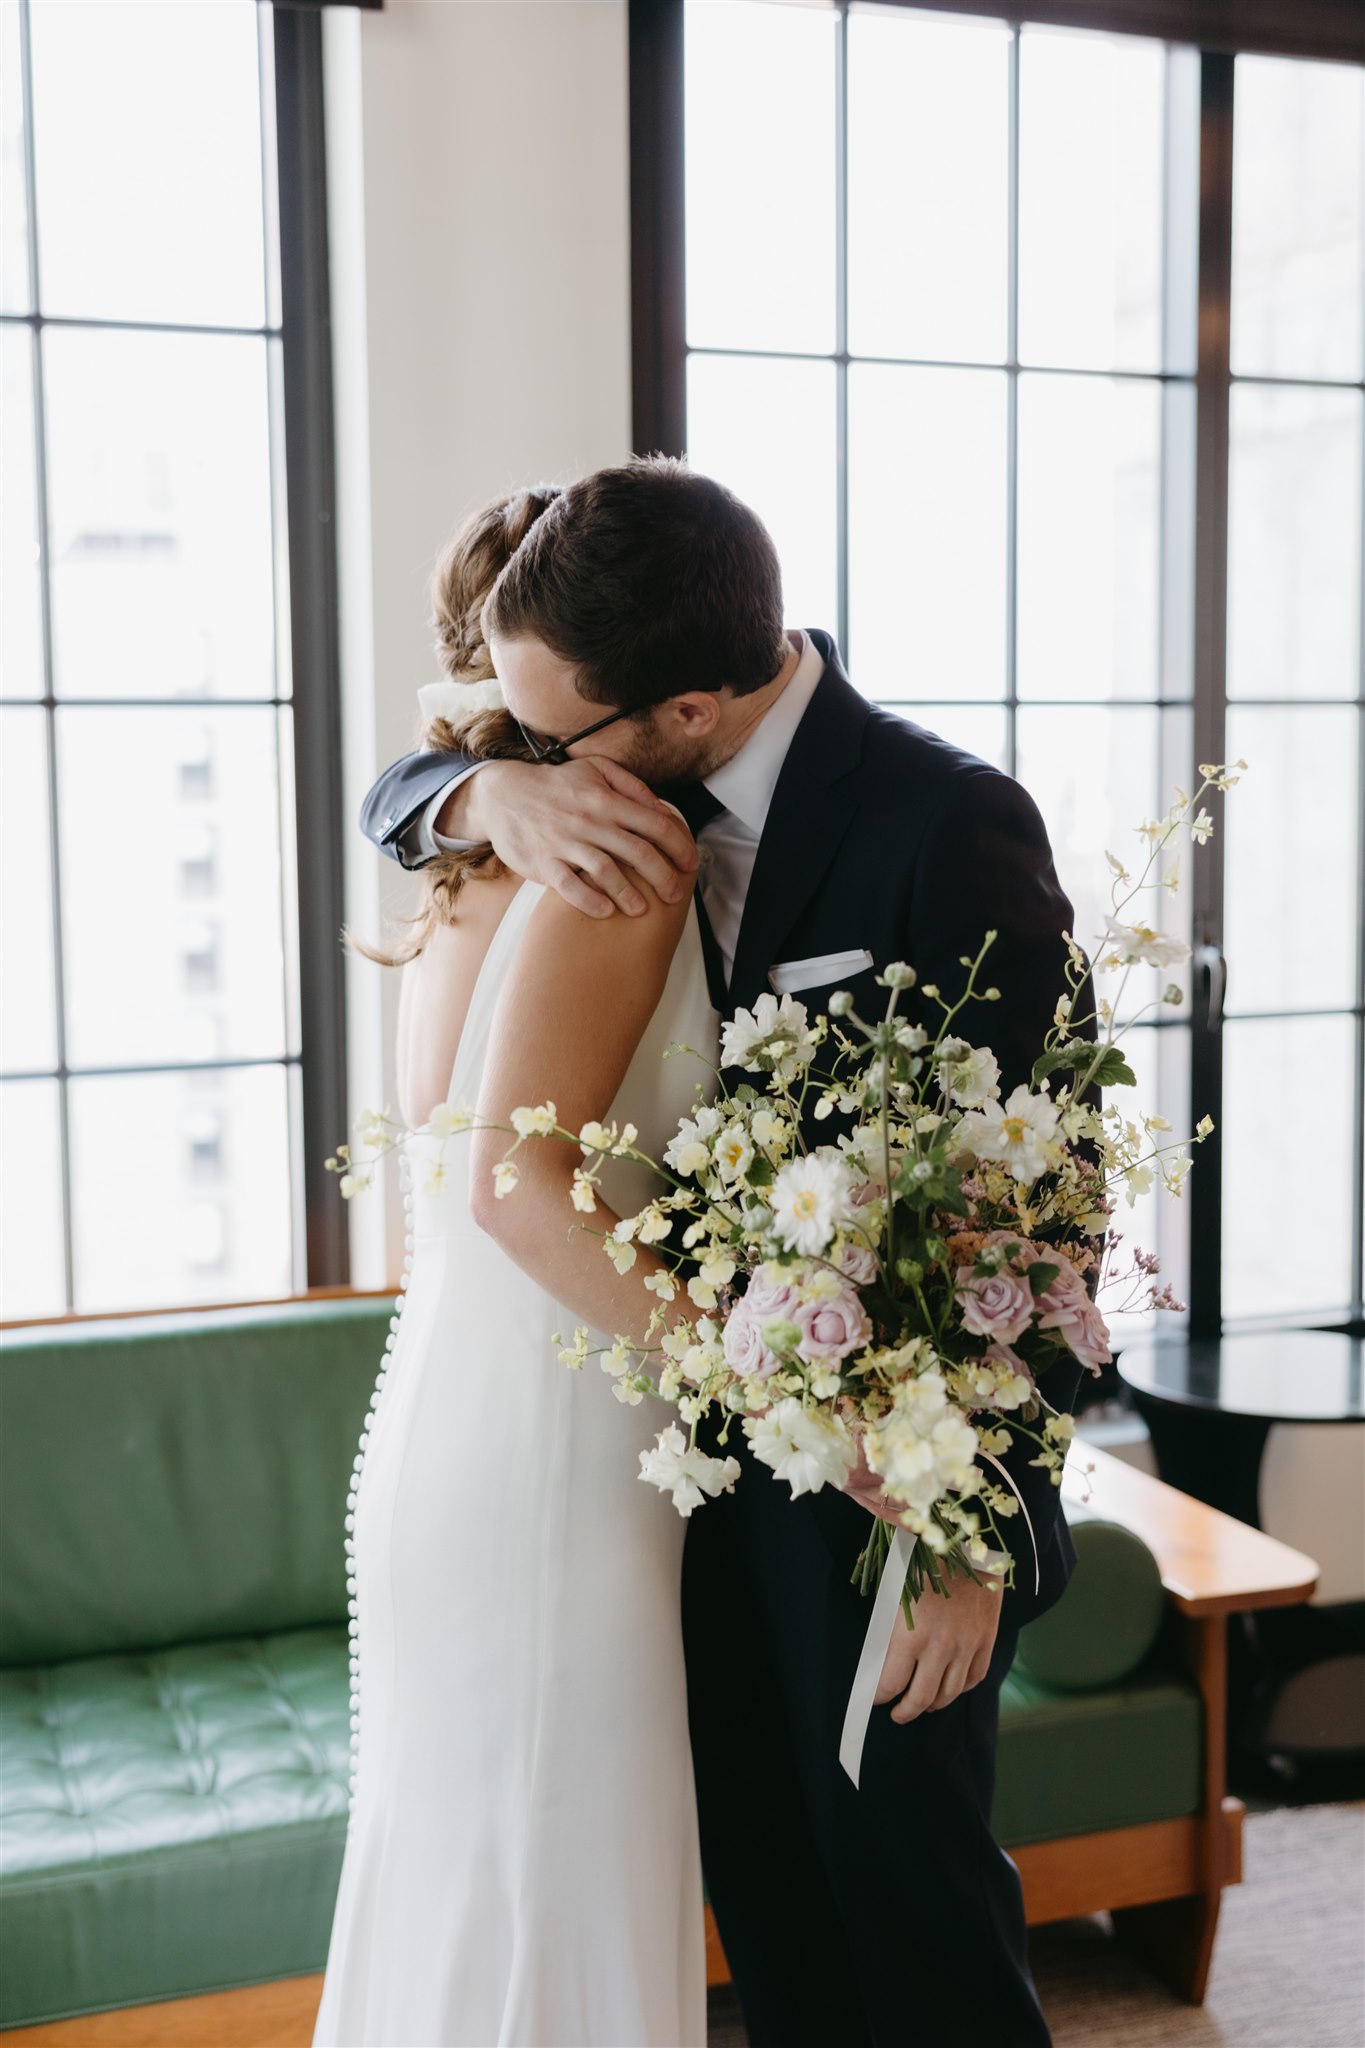 A bride and groom embracing, with the groom kissing the bride's forehead. the bride holds a bouquet of flowers, indoors by large windows.